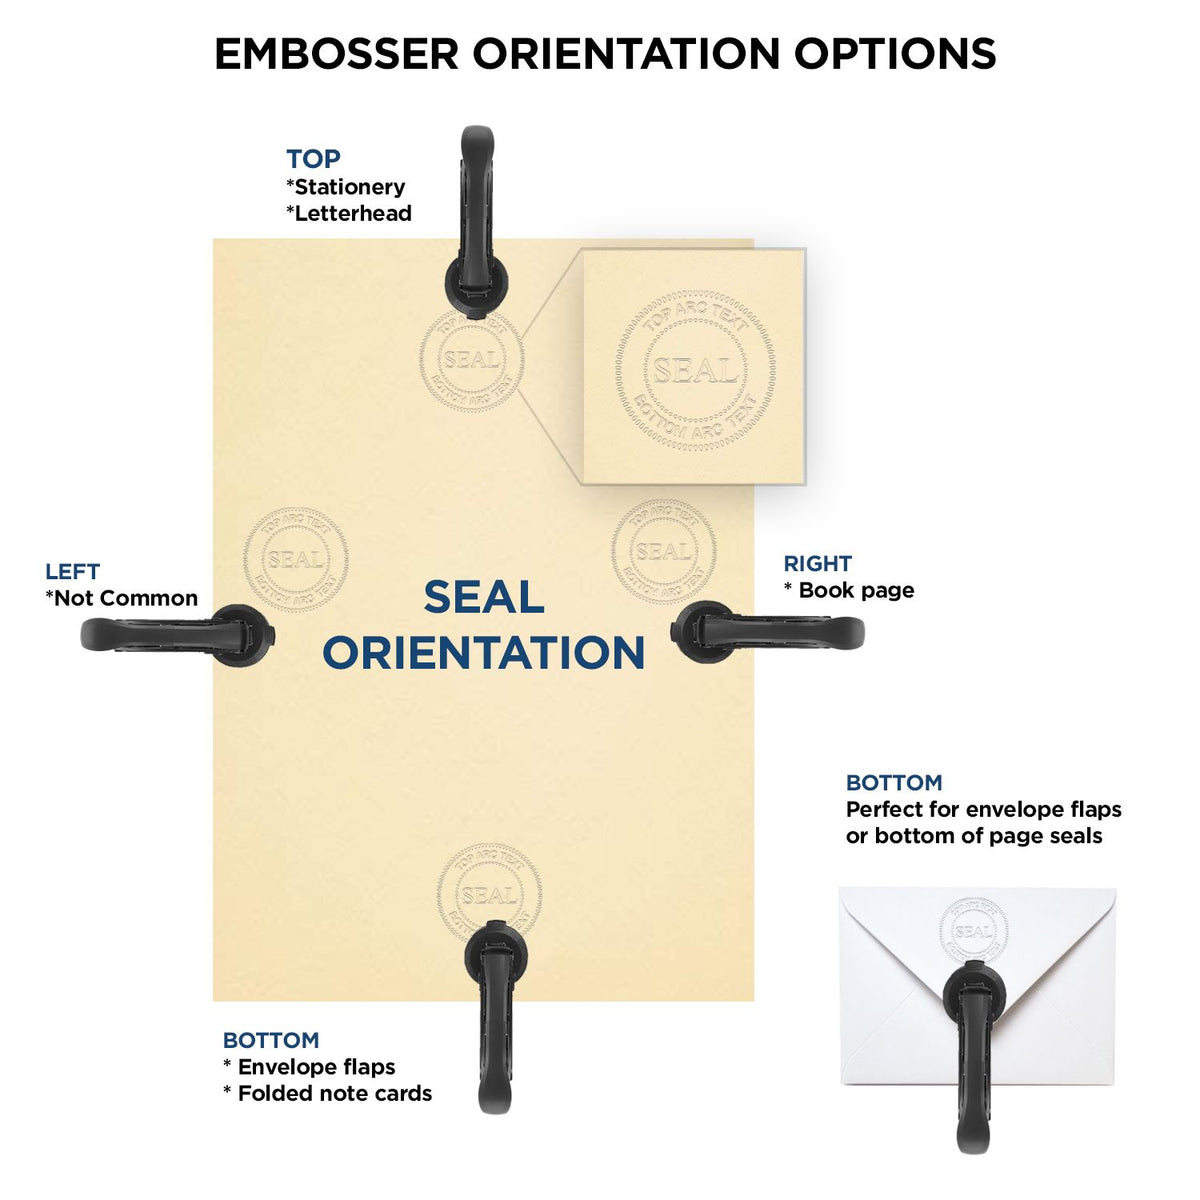 An infographic for the Soft Pocket Washington Landscape Architect Embosser showing embosser orientation, this is showing examples of a top, bottom, right and left insert.